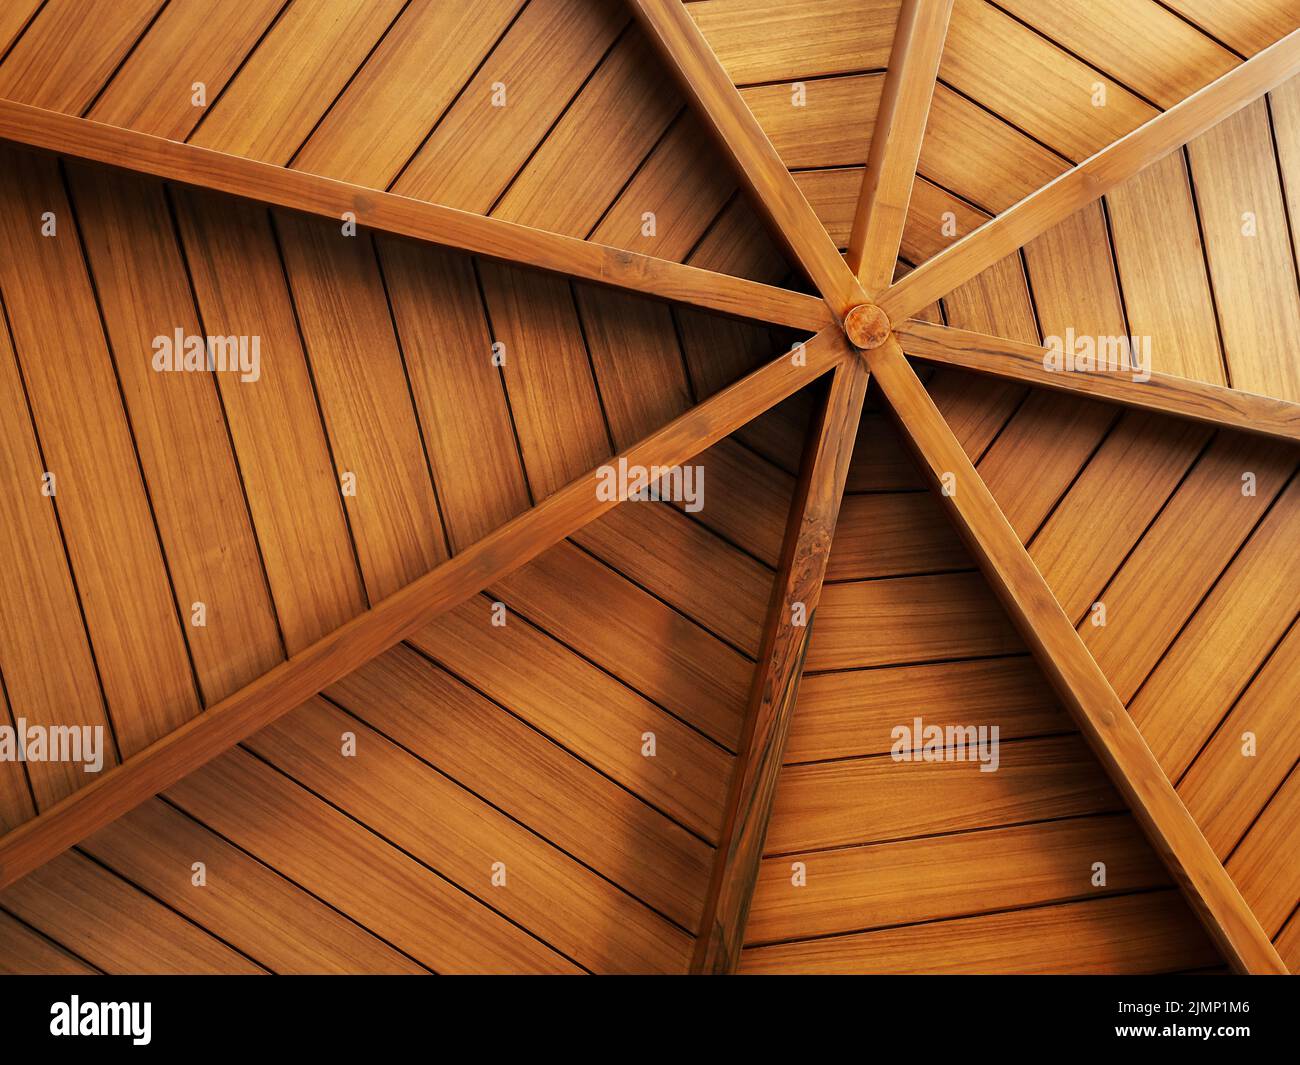 Wooden construction background, arranged to round shape, under the roof. Interior structure of a domed wood plank ceiling, circle pattern, spider web Stock Photo